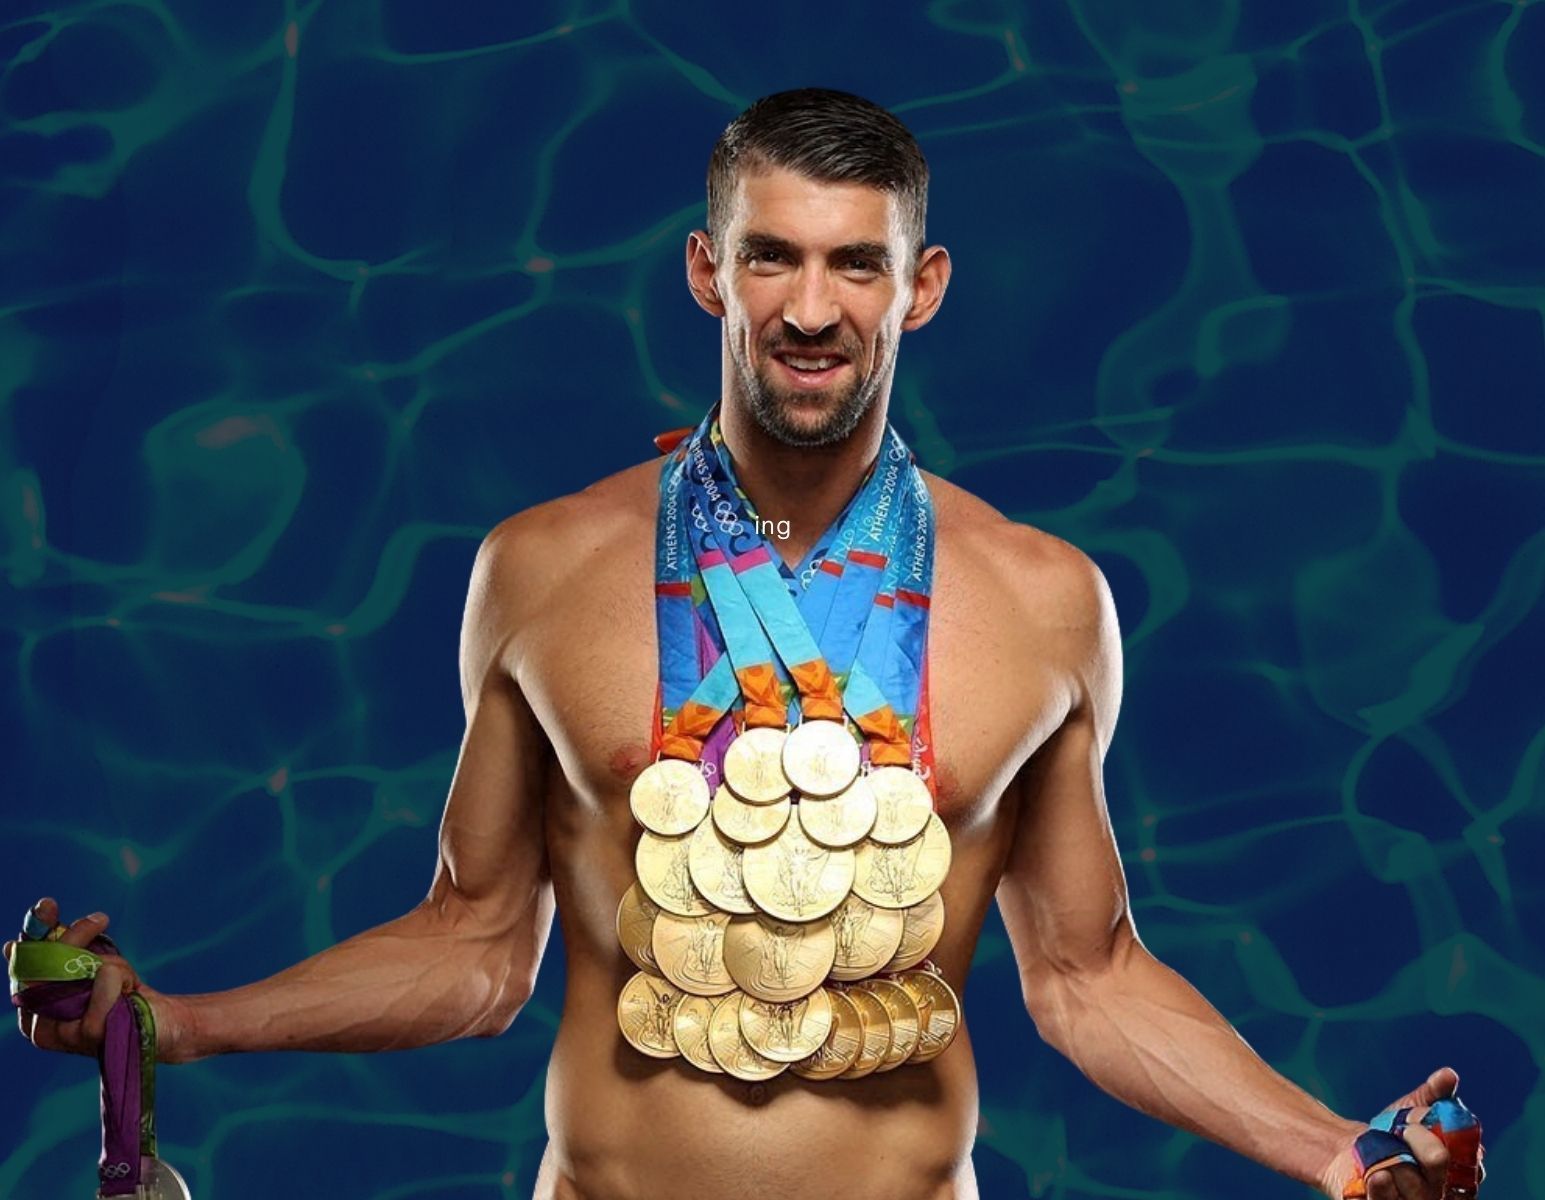 A picture of Michael Phelps, the most decorated Olympian swimmer of all time, wearing and holding all the medals he's won over the span of his career.